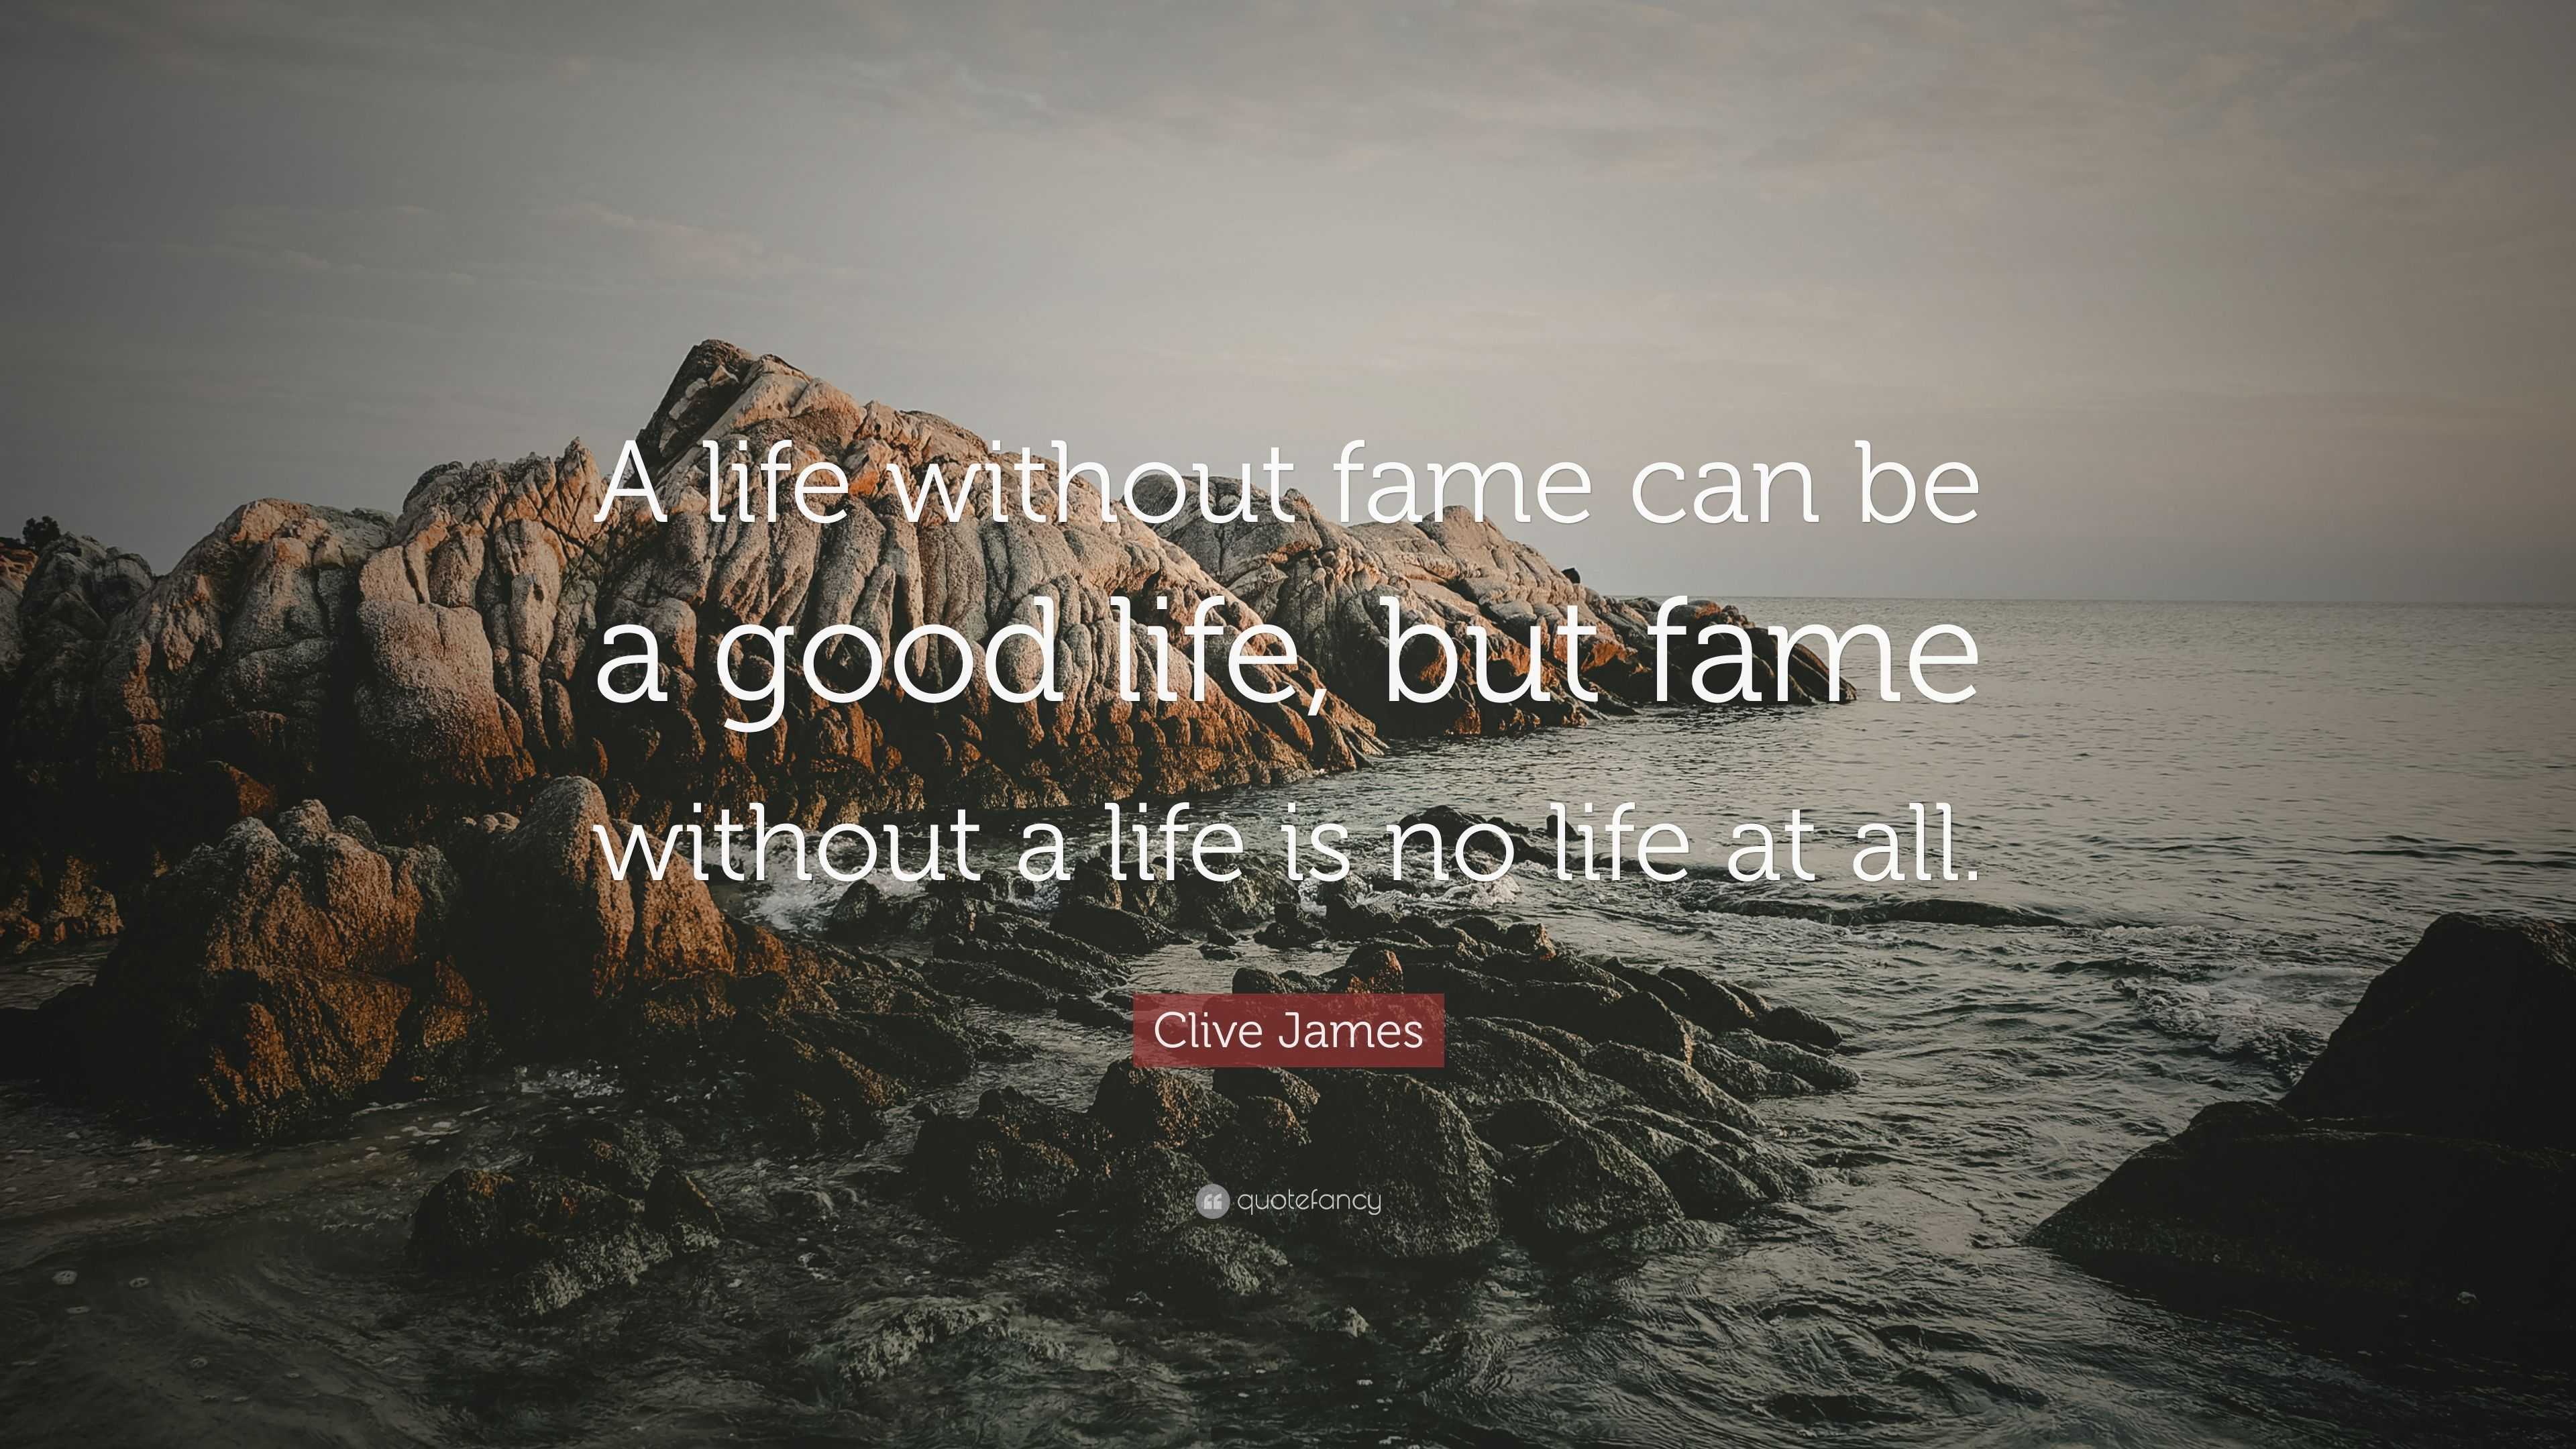 Clive James Quote: “A life without fame can be a good life, but fame